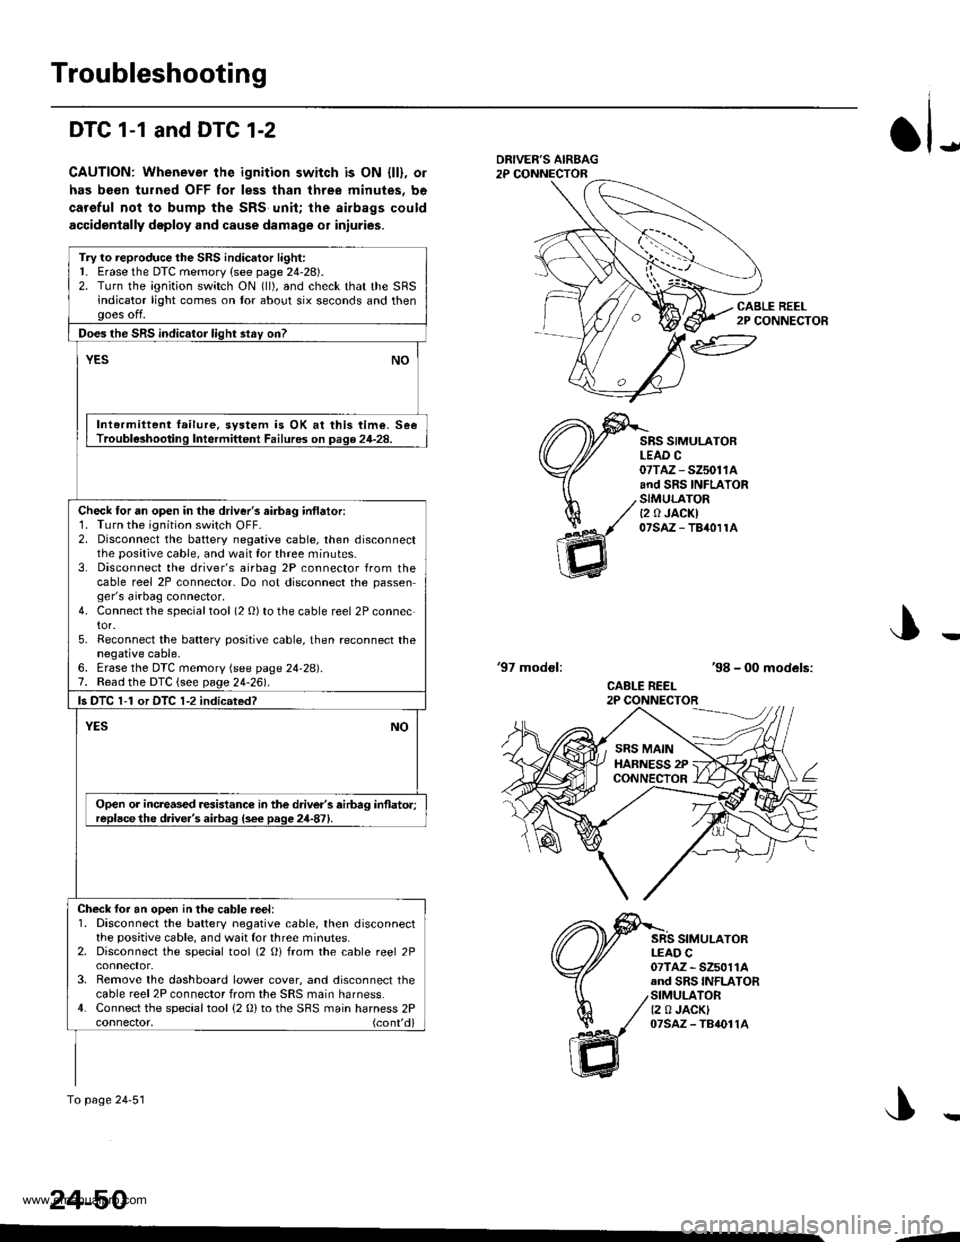 HONDA CR-V 2000 RD1-RD3 / 1.G Owners Guide 
Troubleshooting
DTC 1-1 and DTC 1-2
CAUTION: Whenever the ignition switch is ON {ll}, or
has been turned OFF for less than three minutes, be
careful not to bump the SRS unit; the airbags could
accide